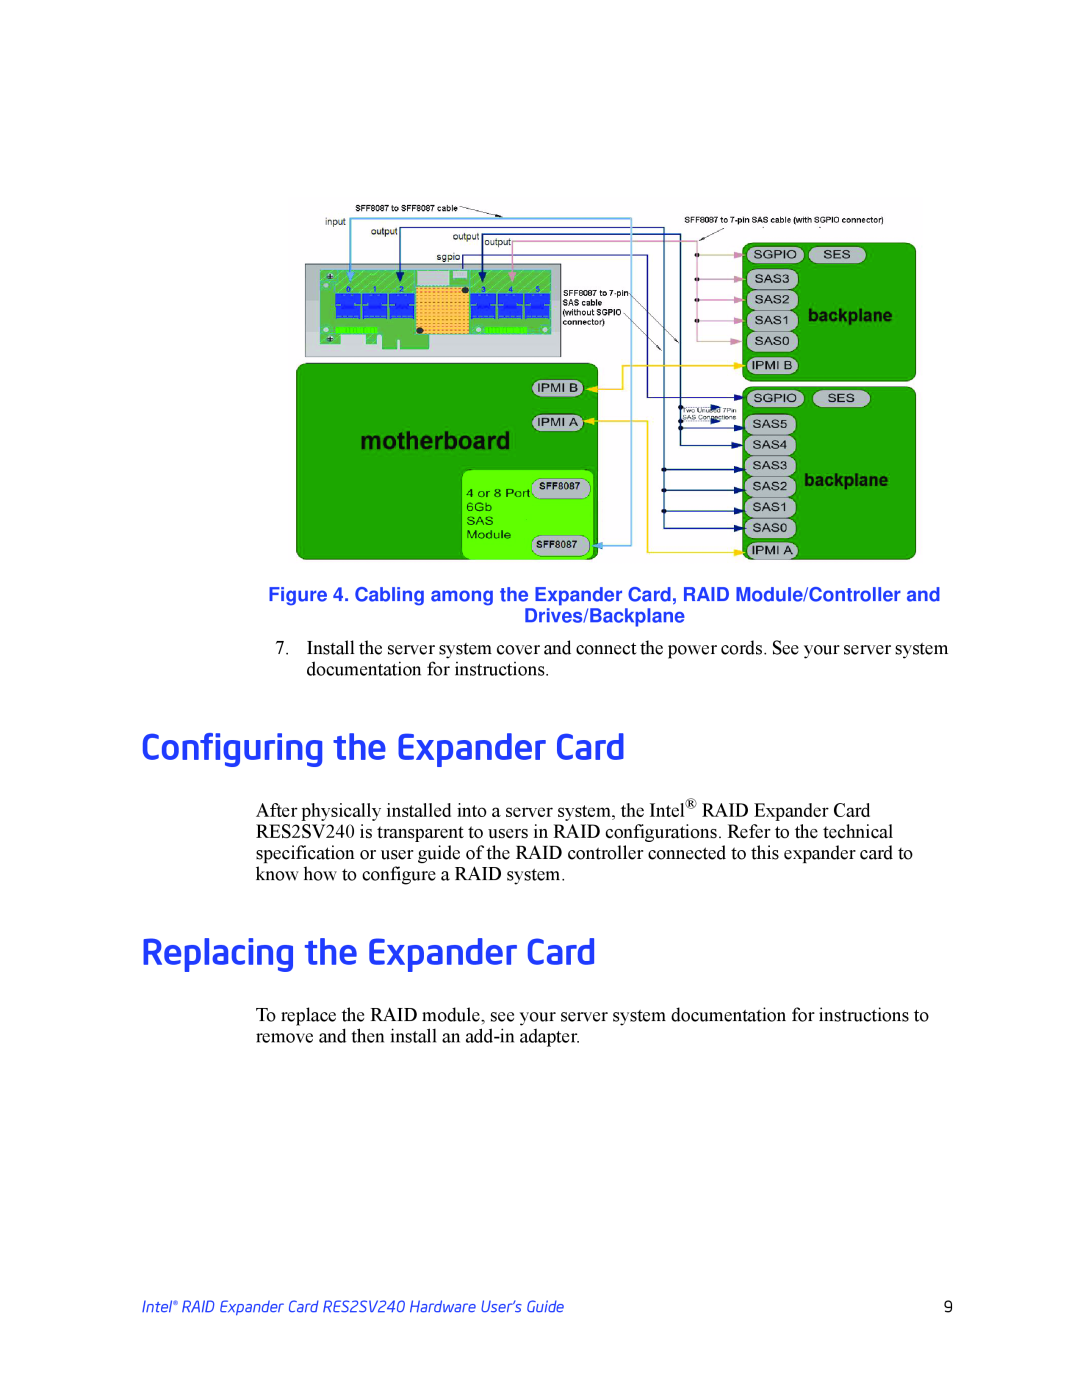 Intel RES2SV240 manual Configuring the Expander Card, Replacing the Expander Card, Drives/Backplane 